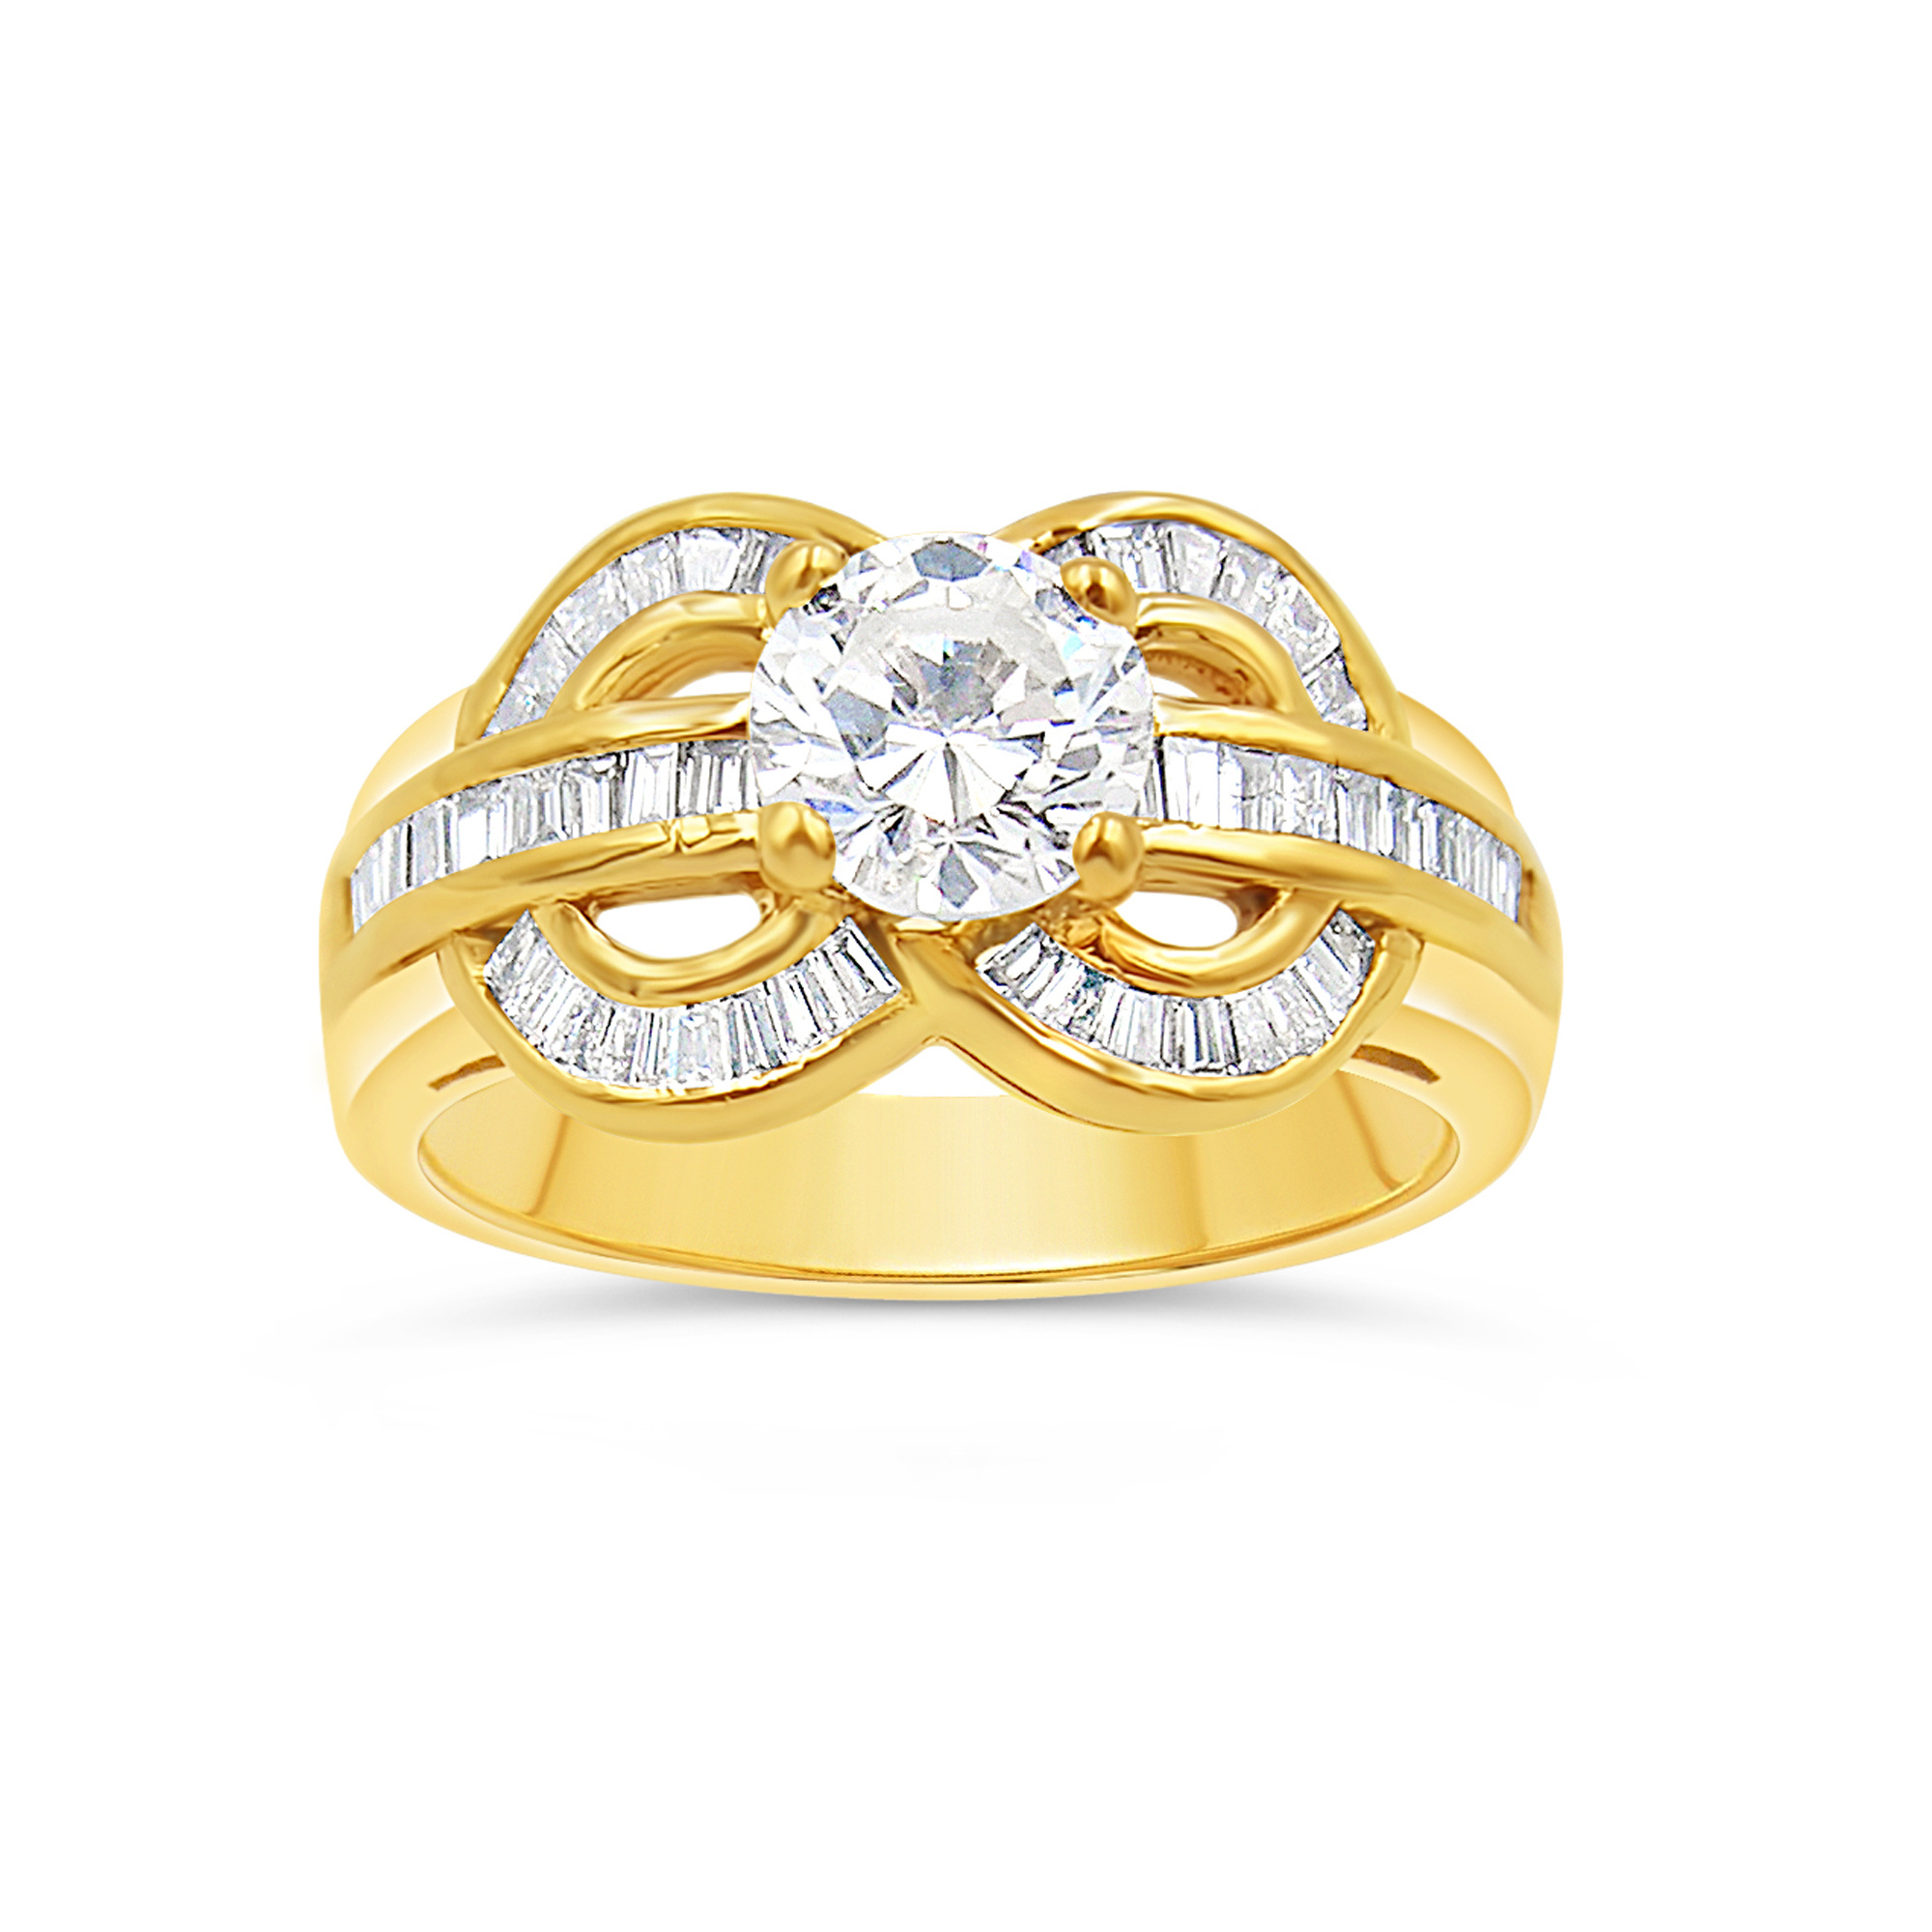 18kt yellow gold engagement ring with 1.62 ct diamonds